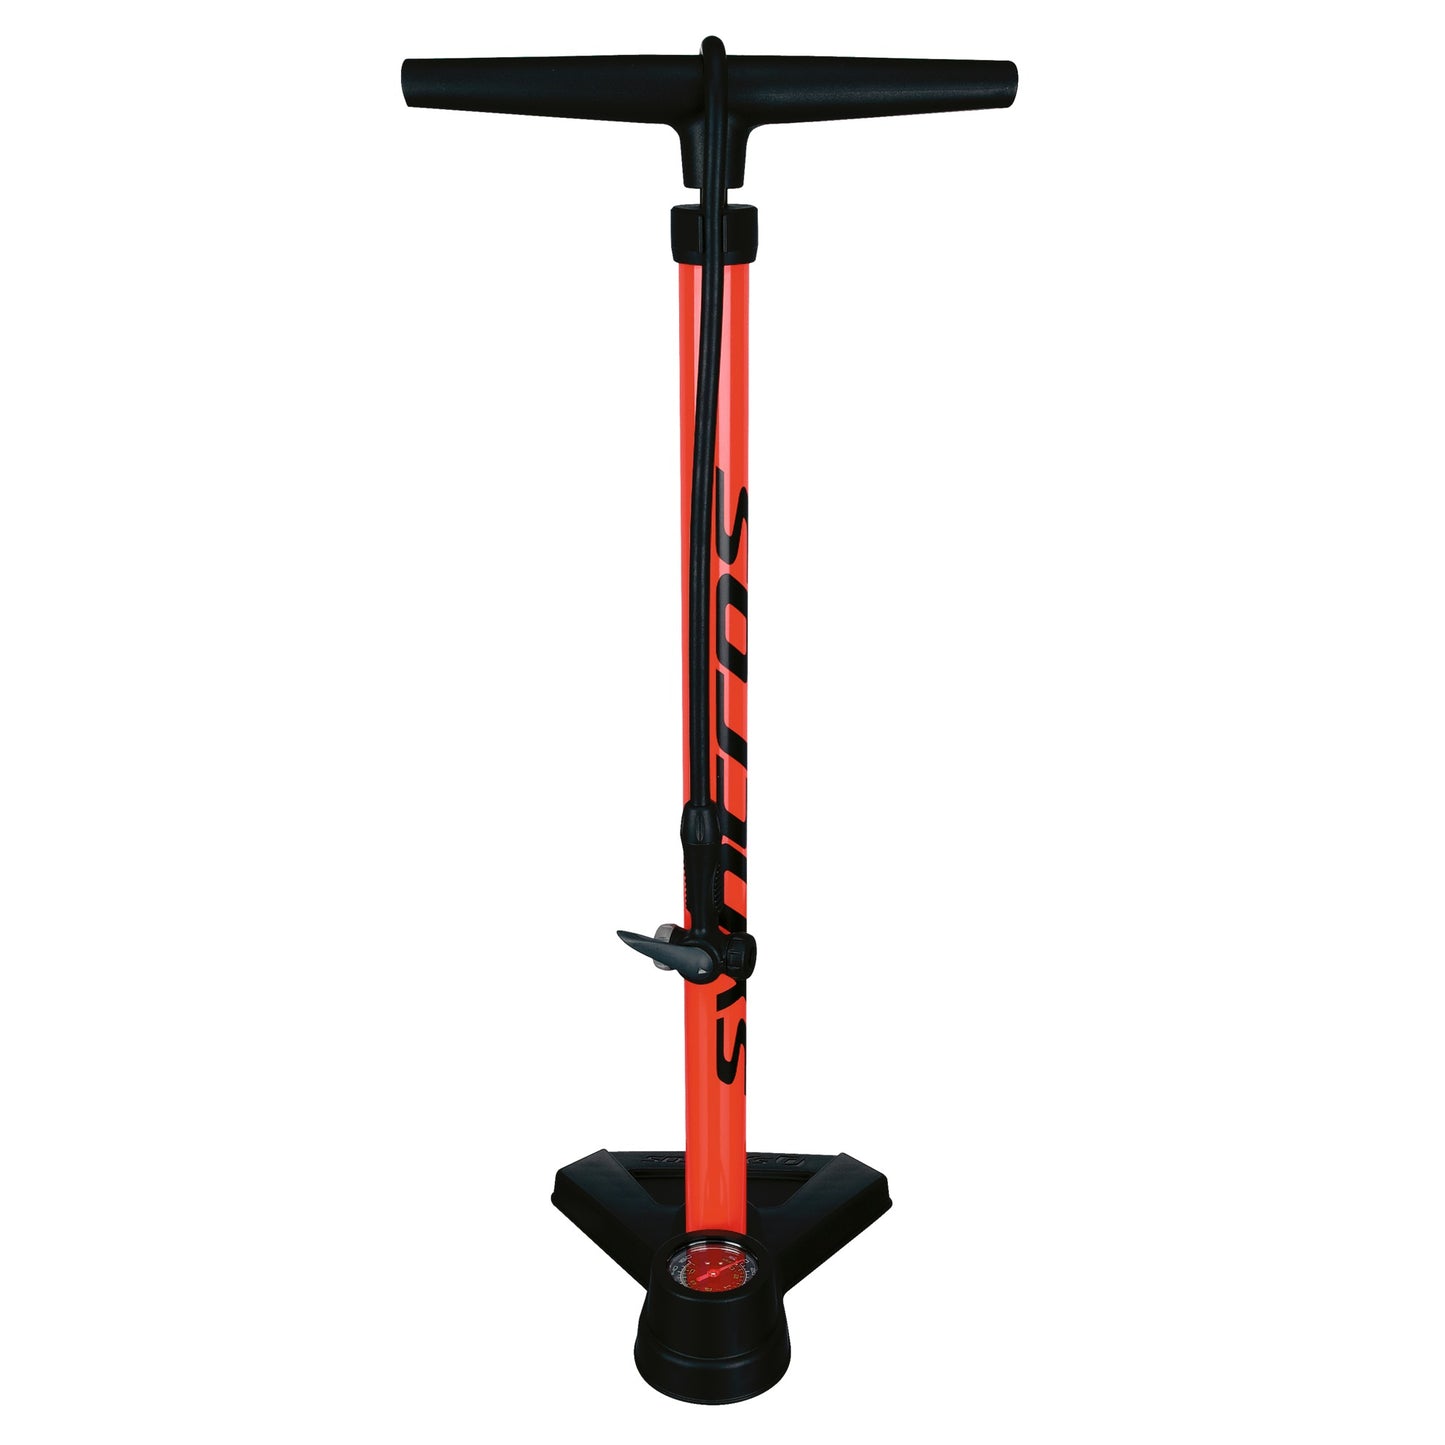 Syncros Floor pump FP3.0 Red/Black one size